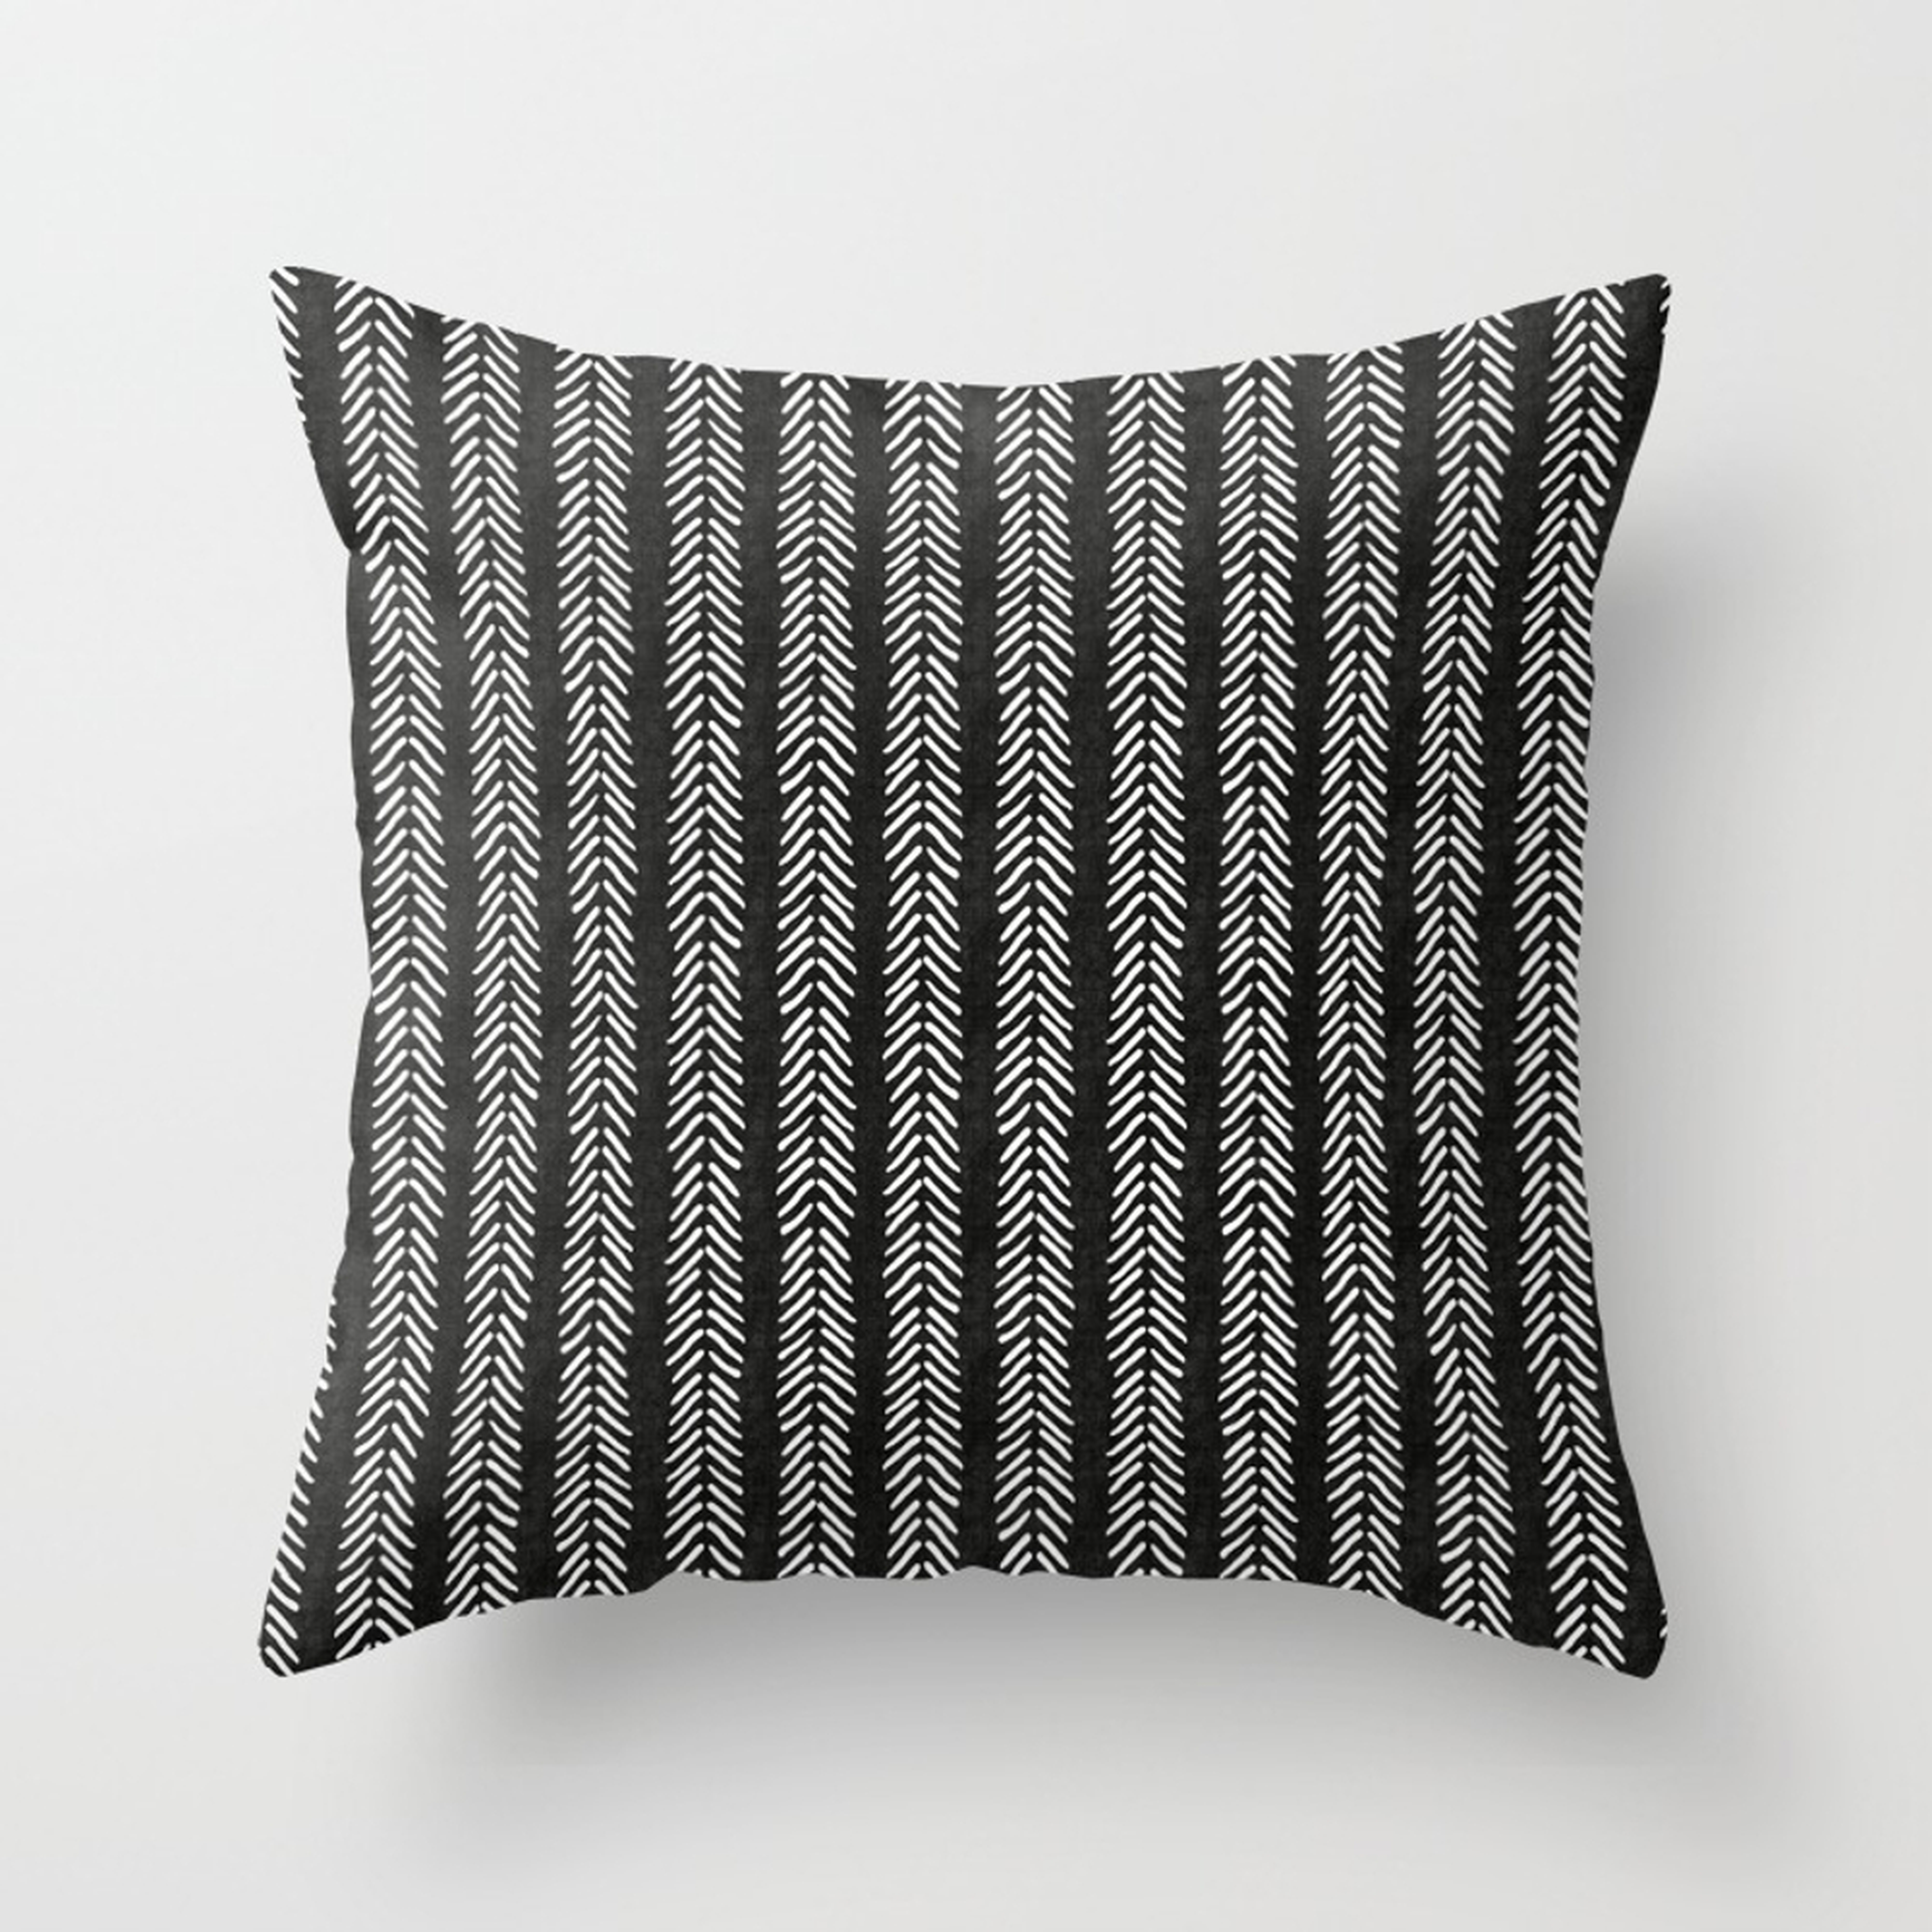 Black And White Small Arrowheads Throw Pillow by House Of Haha - Cover (16" x 16") With Pillow Insert - Outdoor Pillow - Society6